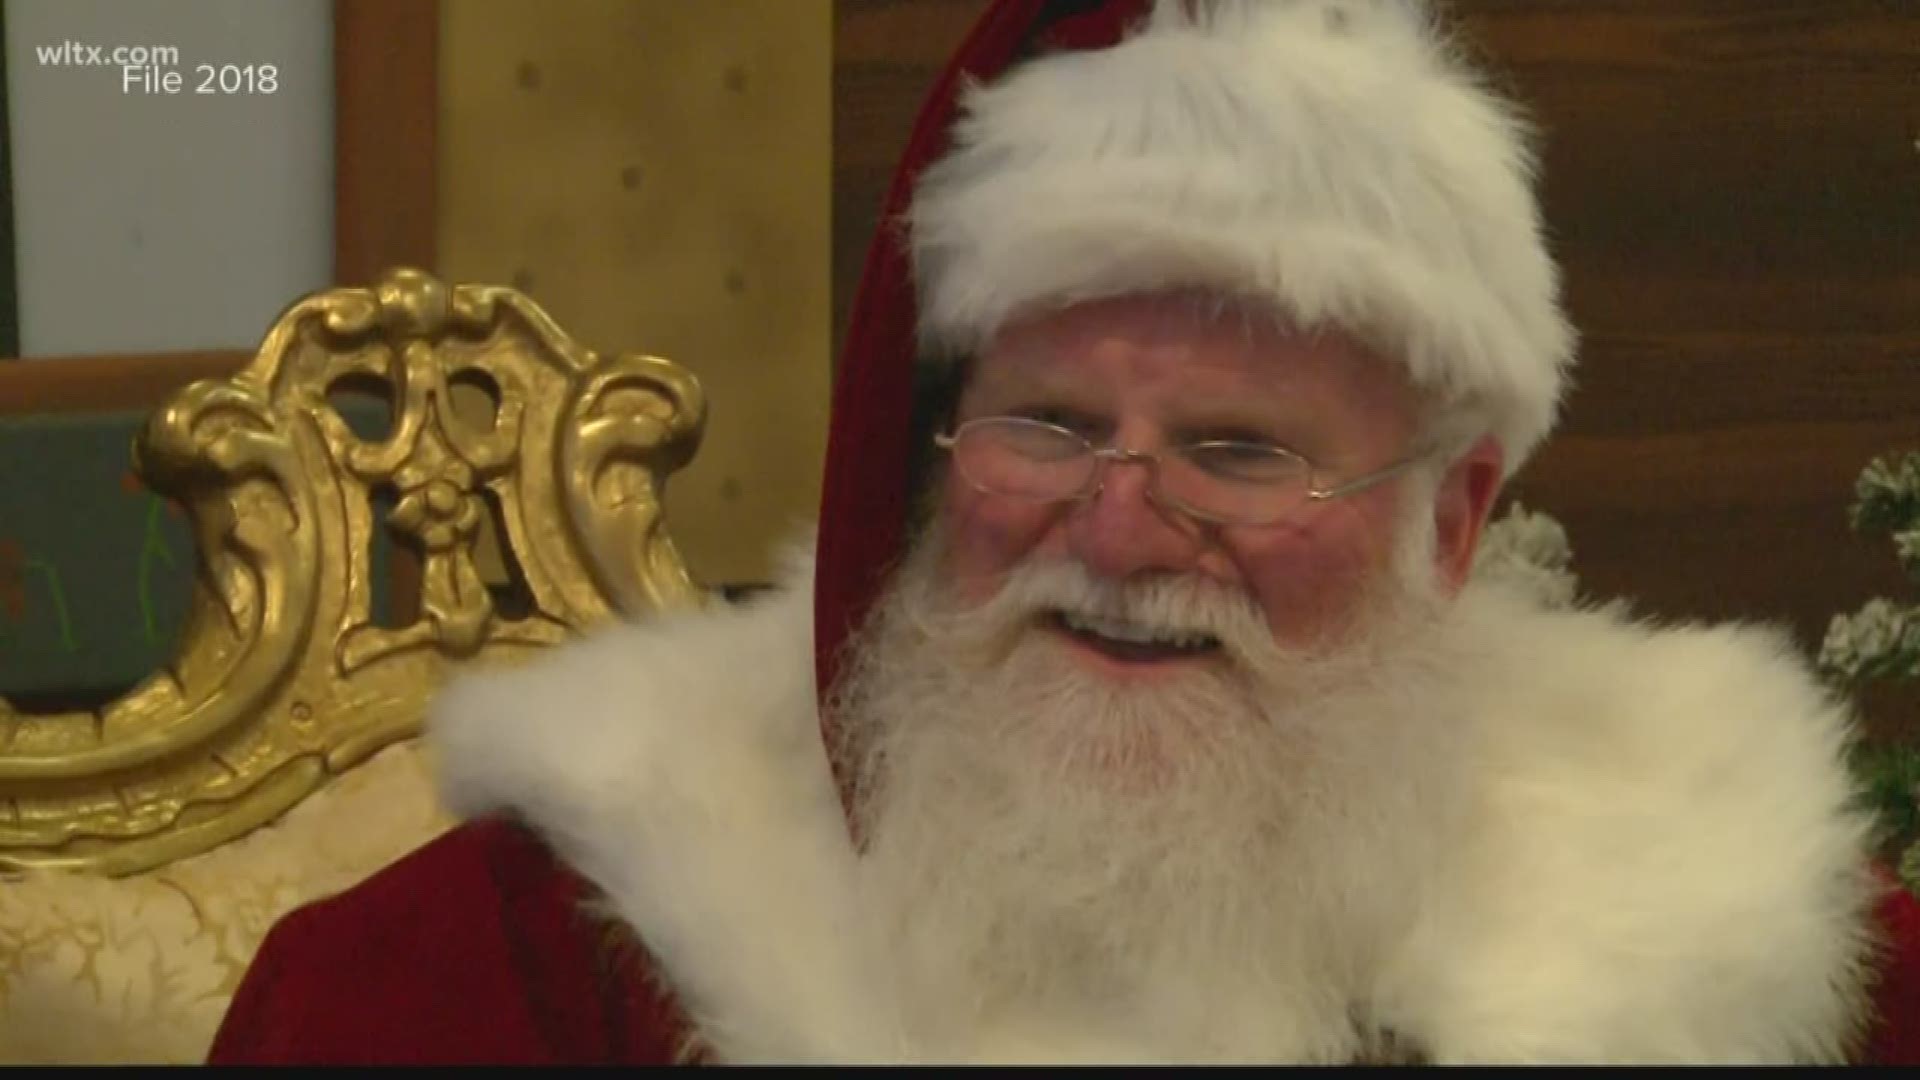 EdVenture Children's Museum is having their 'Sensitive Santa' event for those who view Christmas time a little differently.